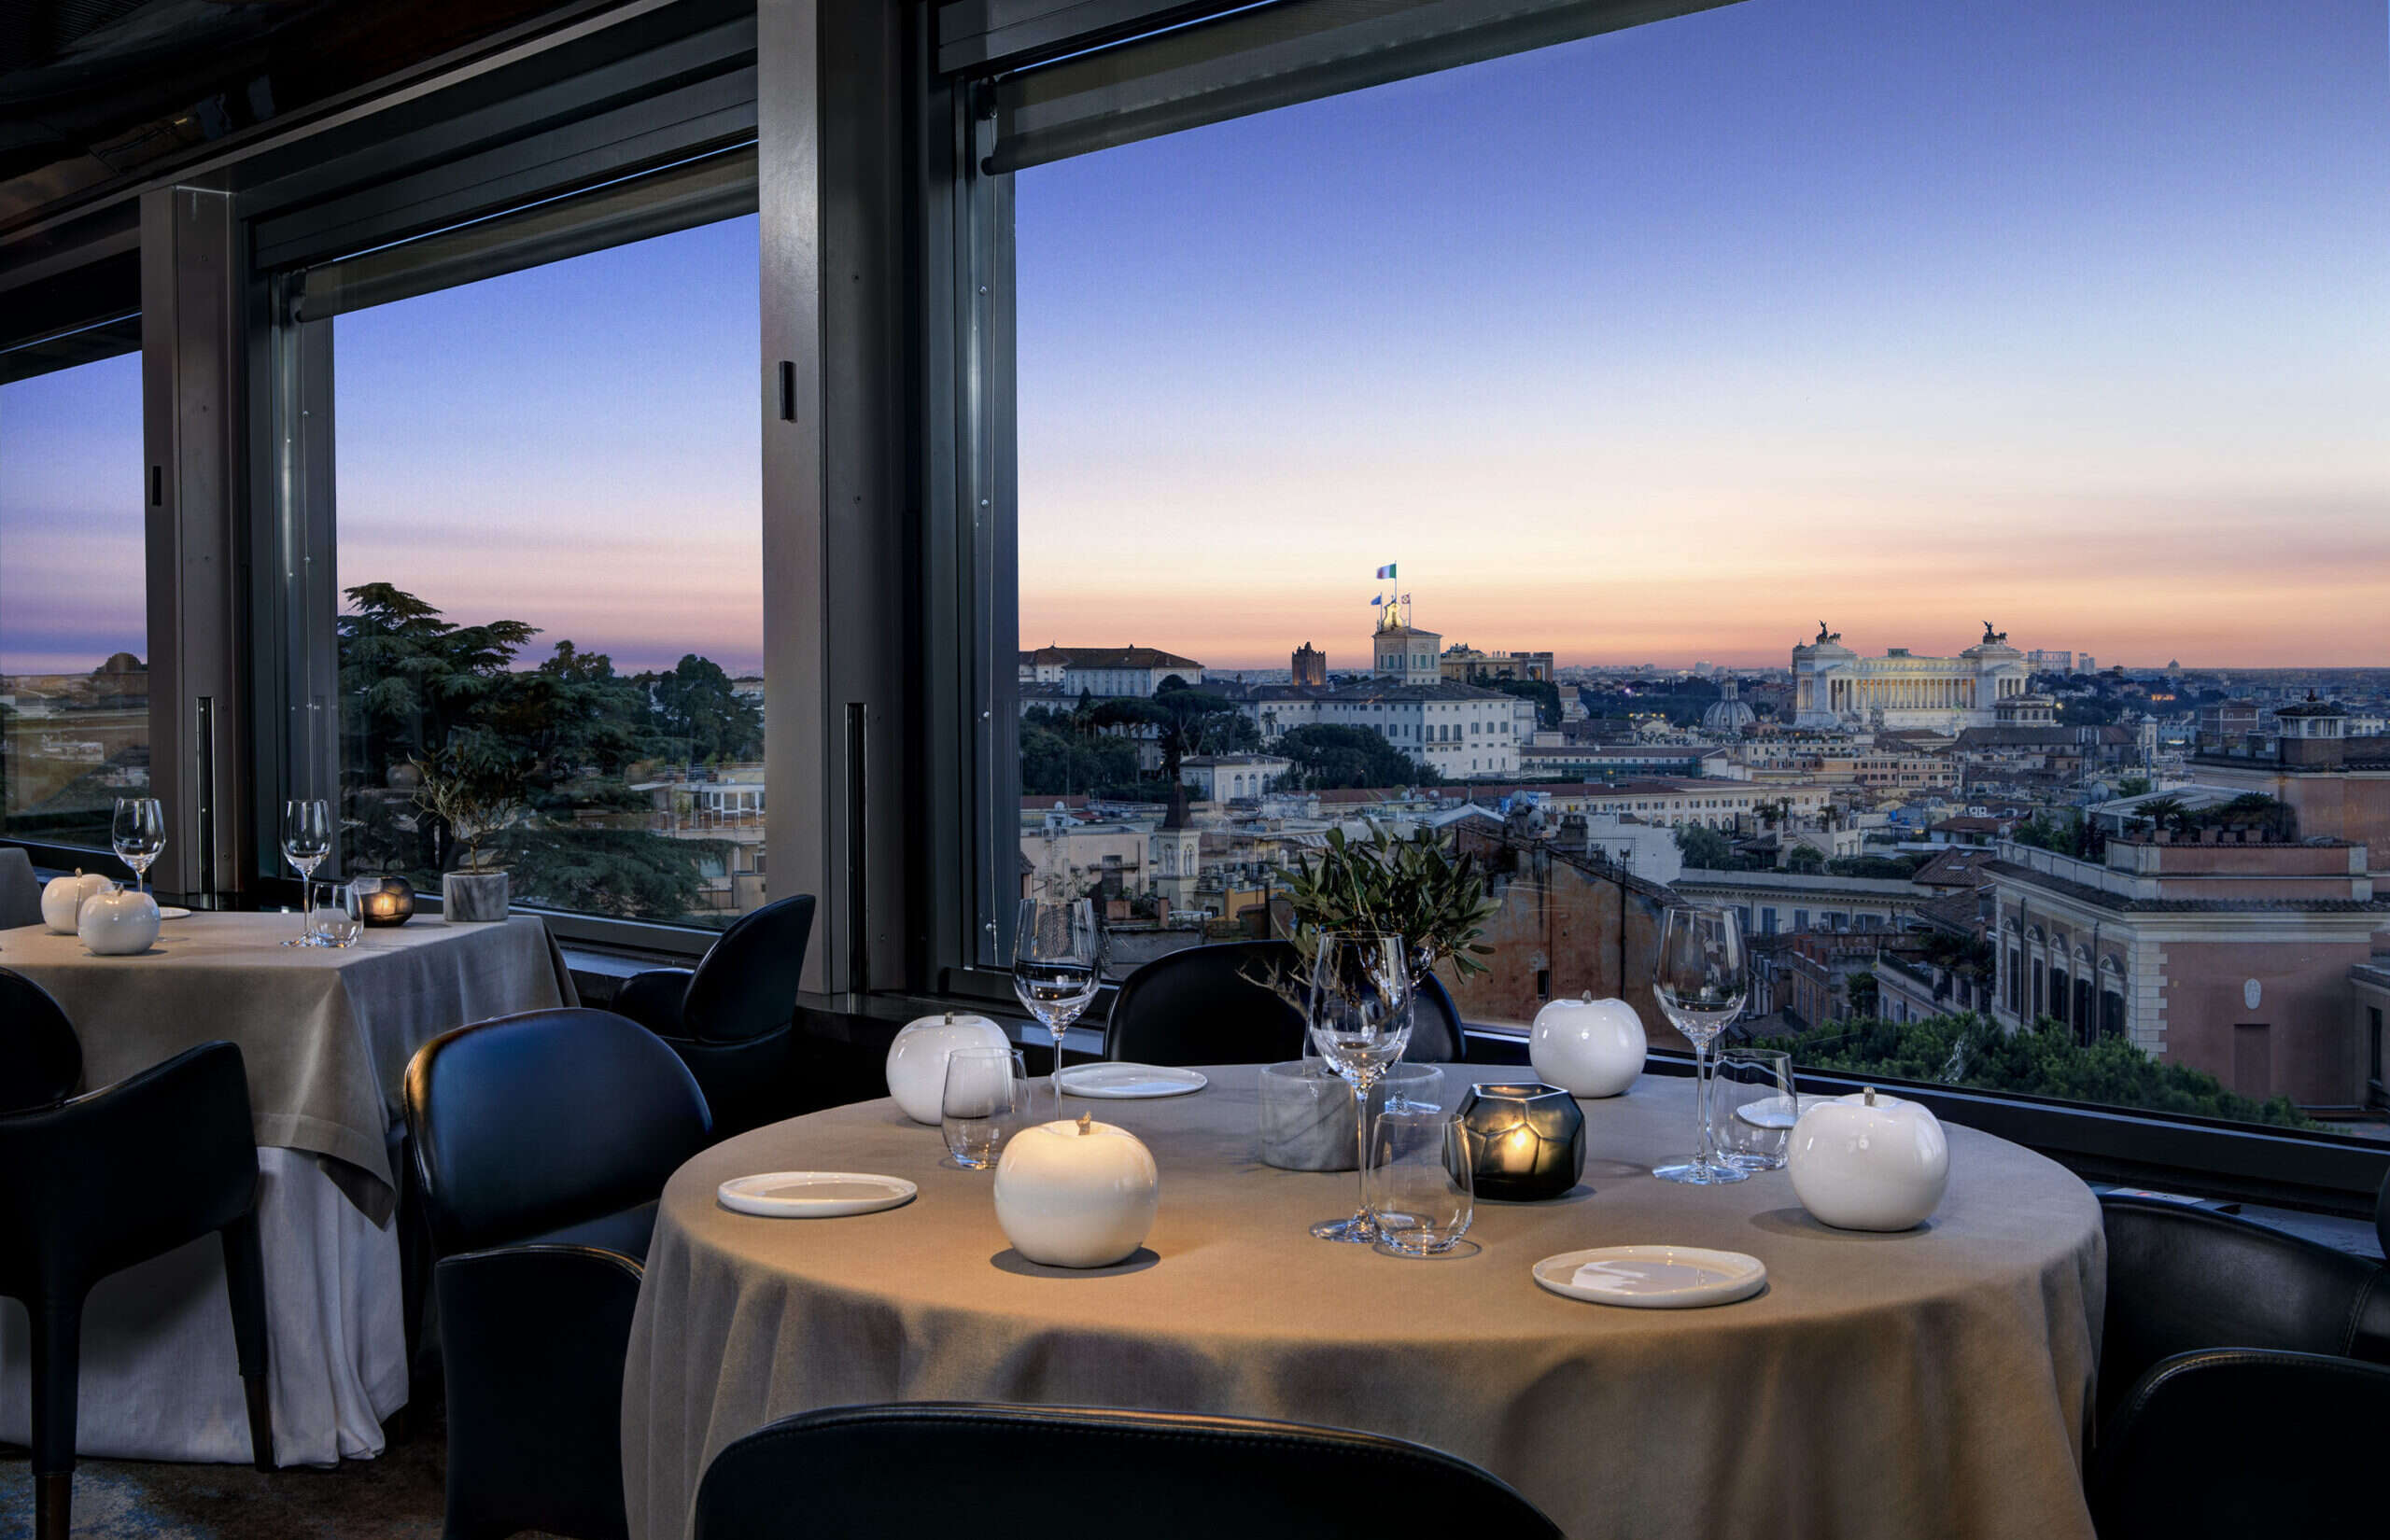 The Best Fine Dining Restaurants in Rome to Visit in 2021